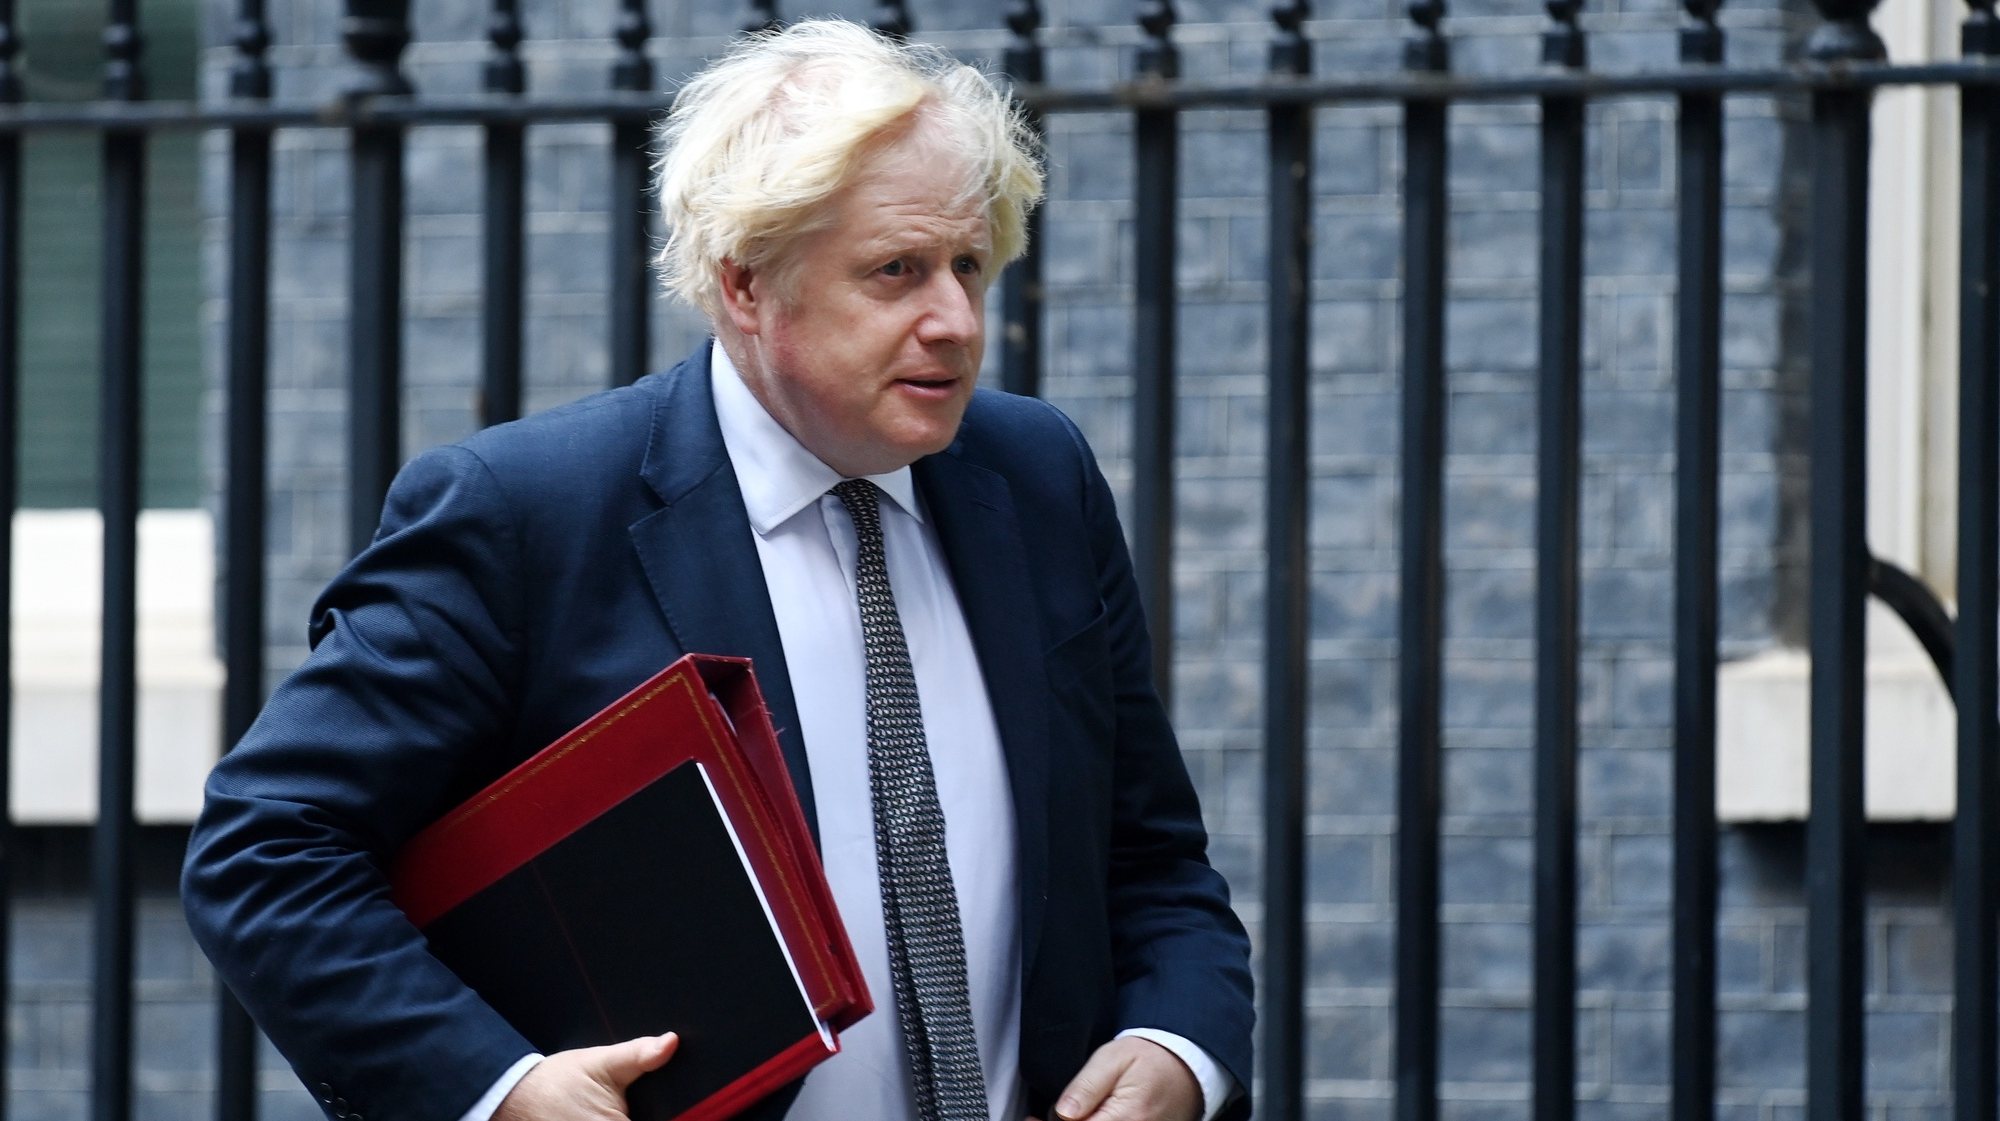 epa09427556 British Prime Minister Boris Johnson departs 10 Downing Street in London, Britain, 24 August 2021. Johnson is set to push US President Biden for a troop withdrawal extension in Afghanistan during an emergency G7 virtual summit meeting scheduled for 24 August.  EPA/ANDY RAIN